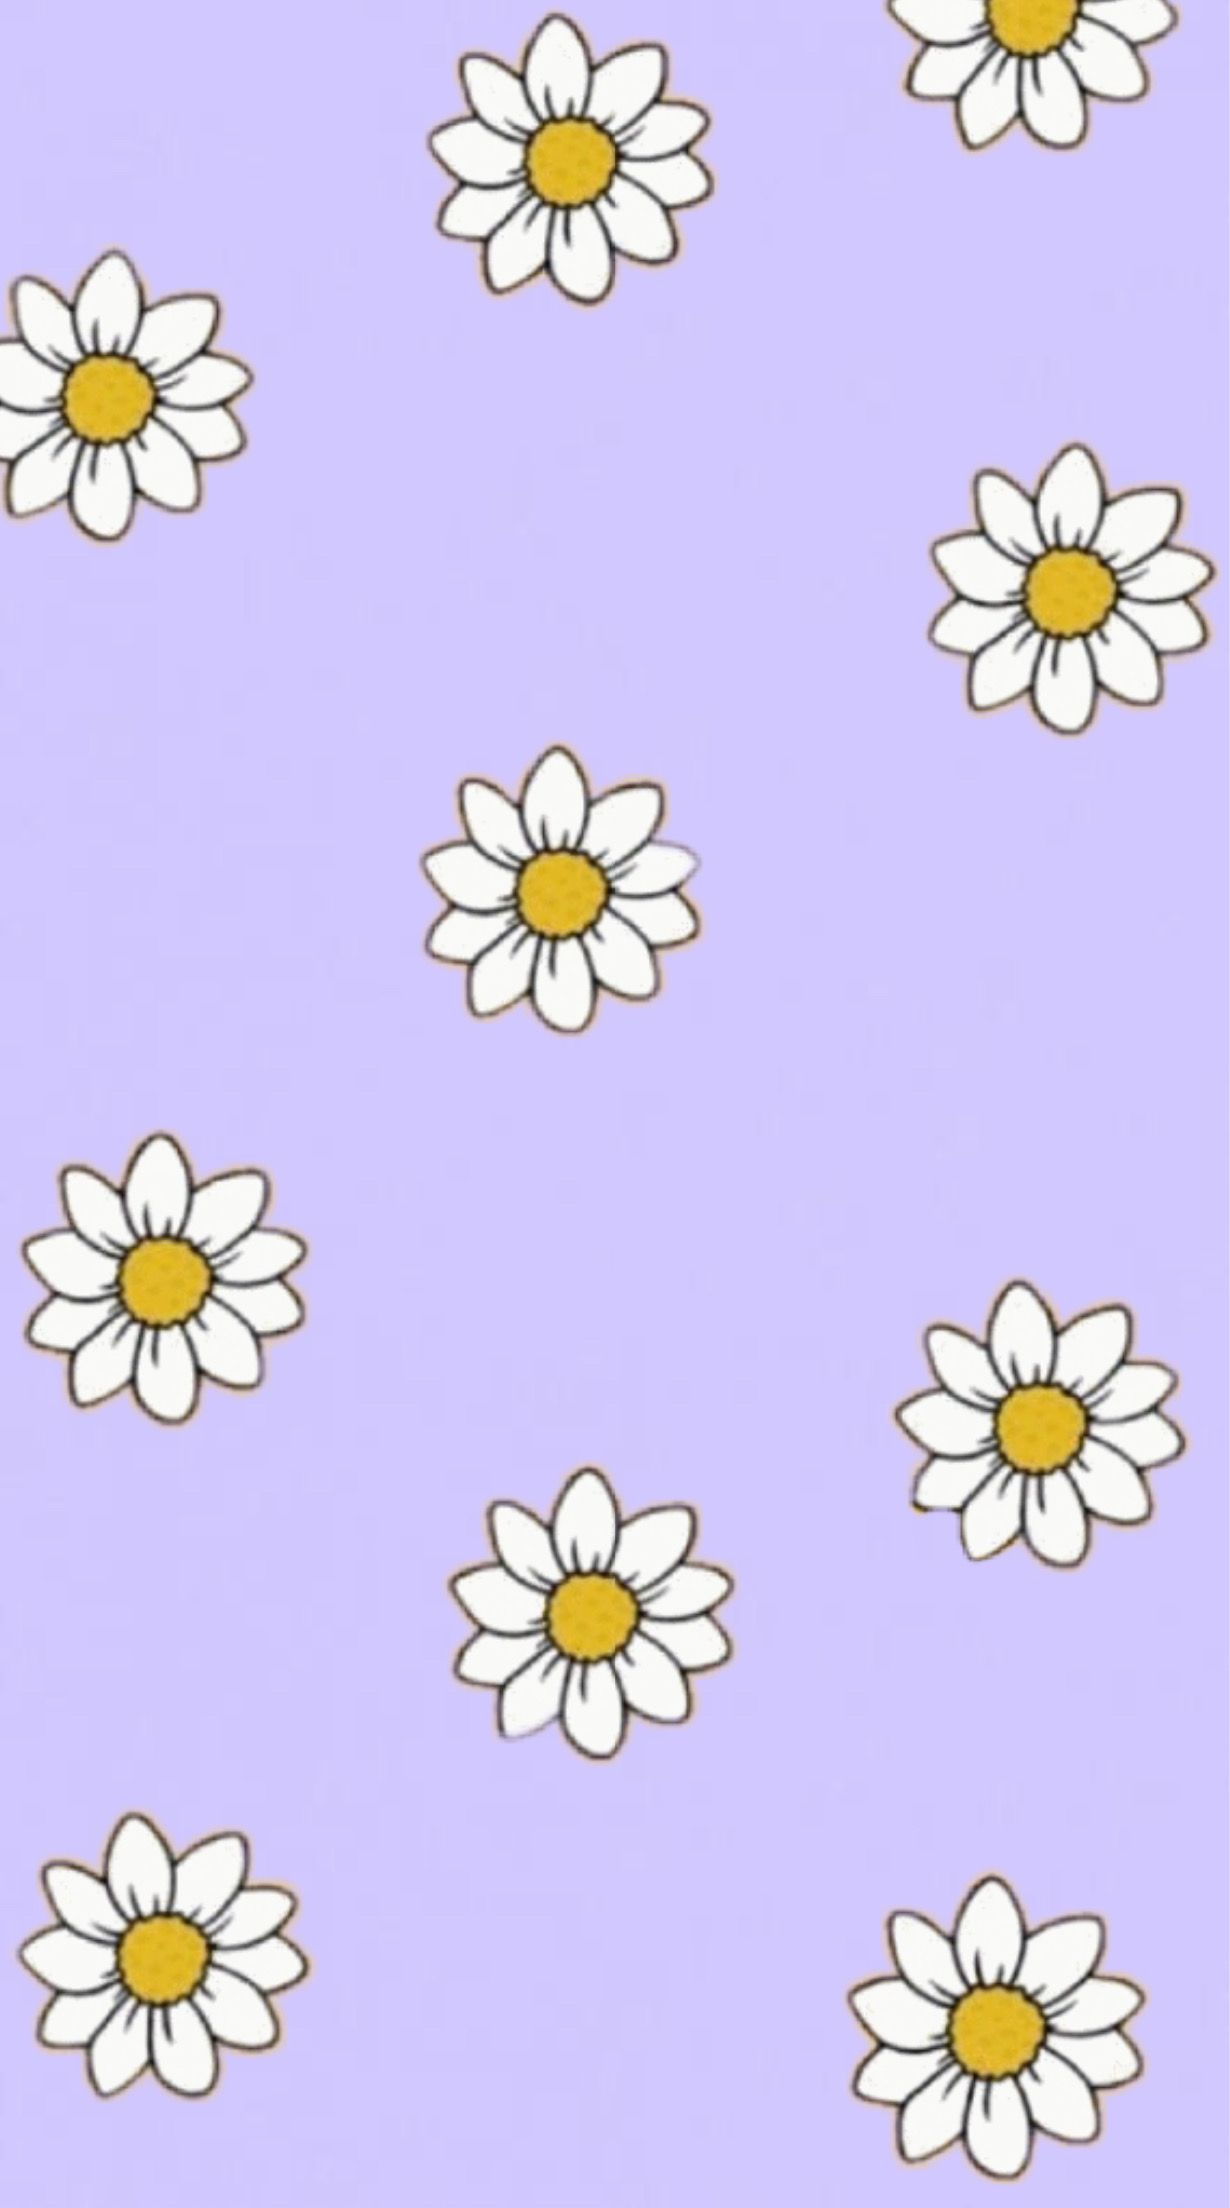 Daisy Aesthetic Wallpapers ~ Daisy Aesthetic Wallpapers | Ghatrisate